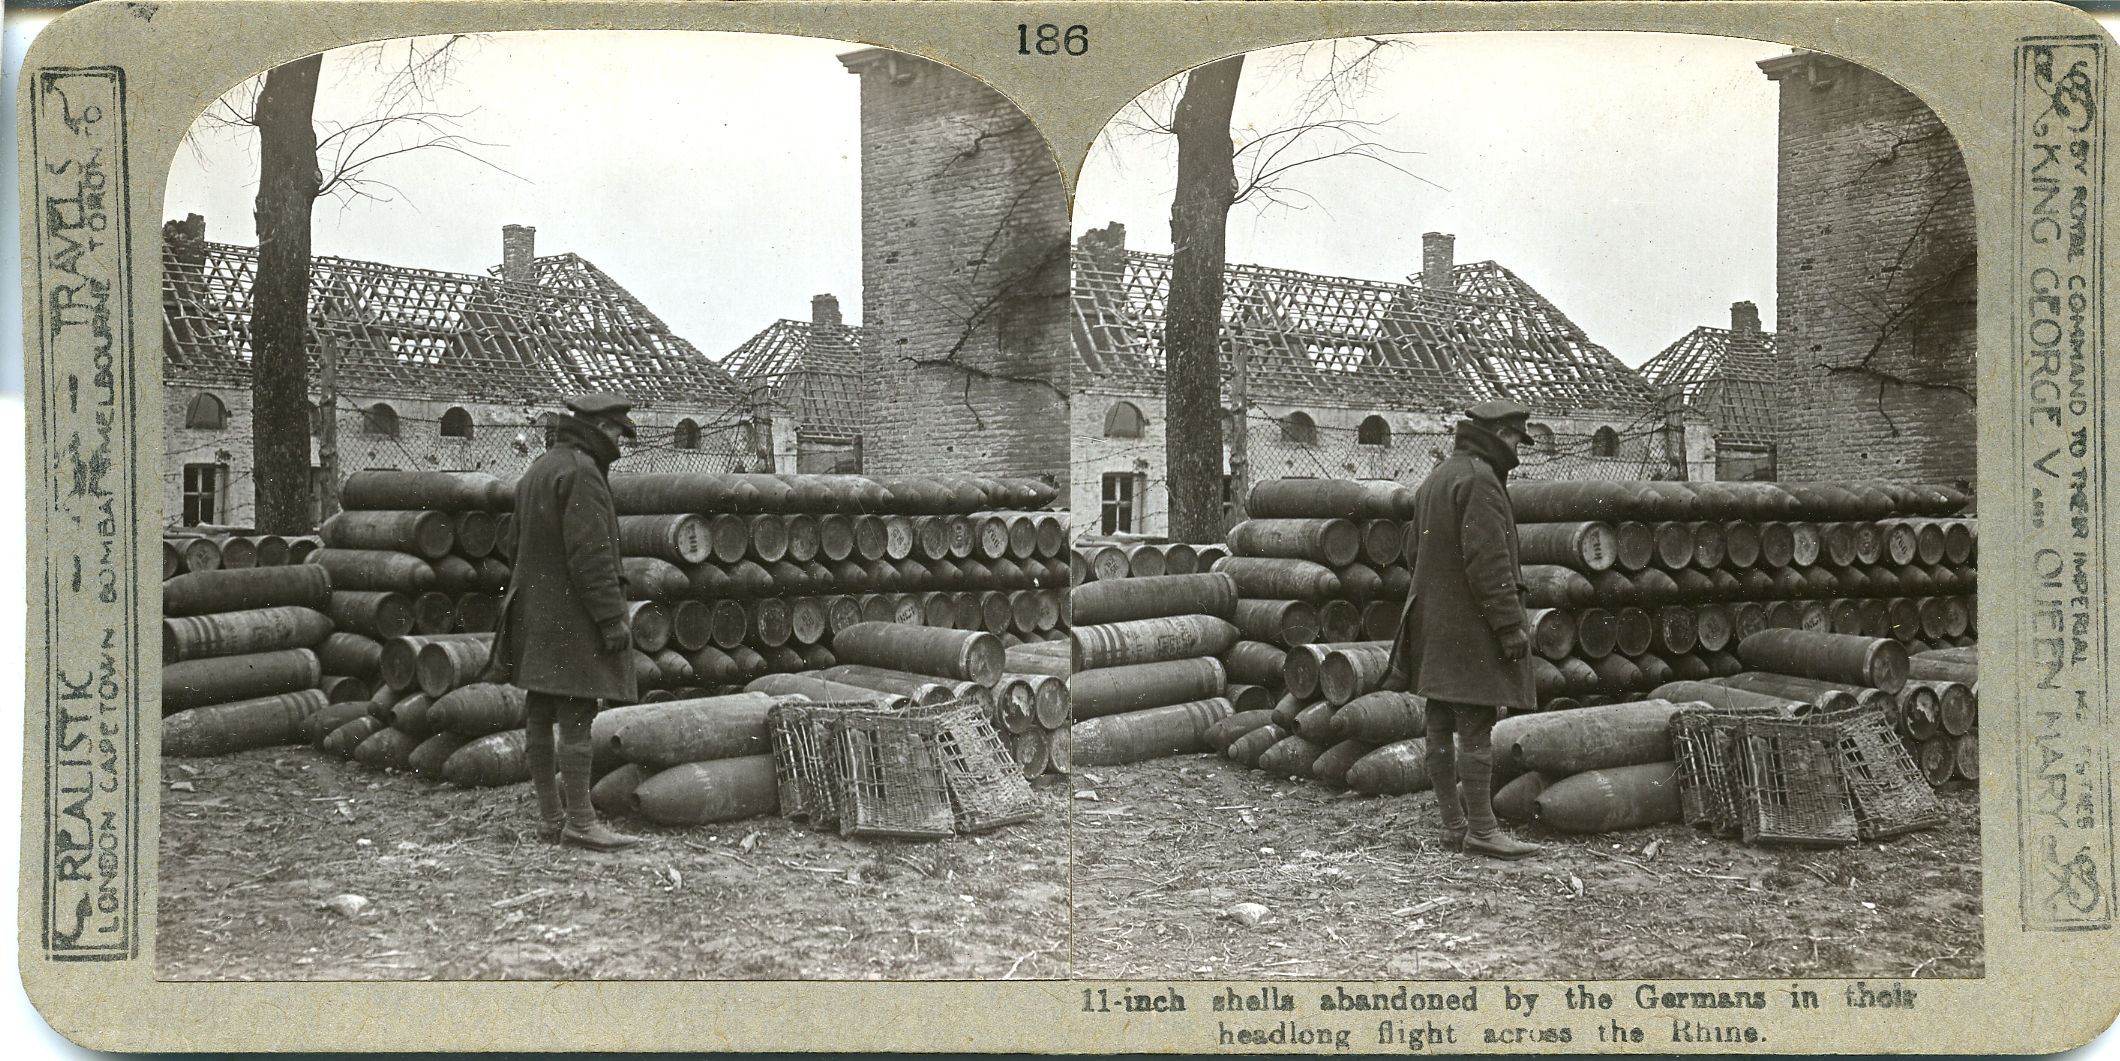 11 inch shells abandoned by the Germans in their headlong flight across the Rhine